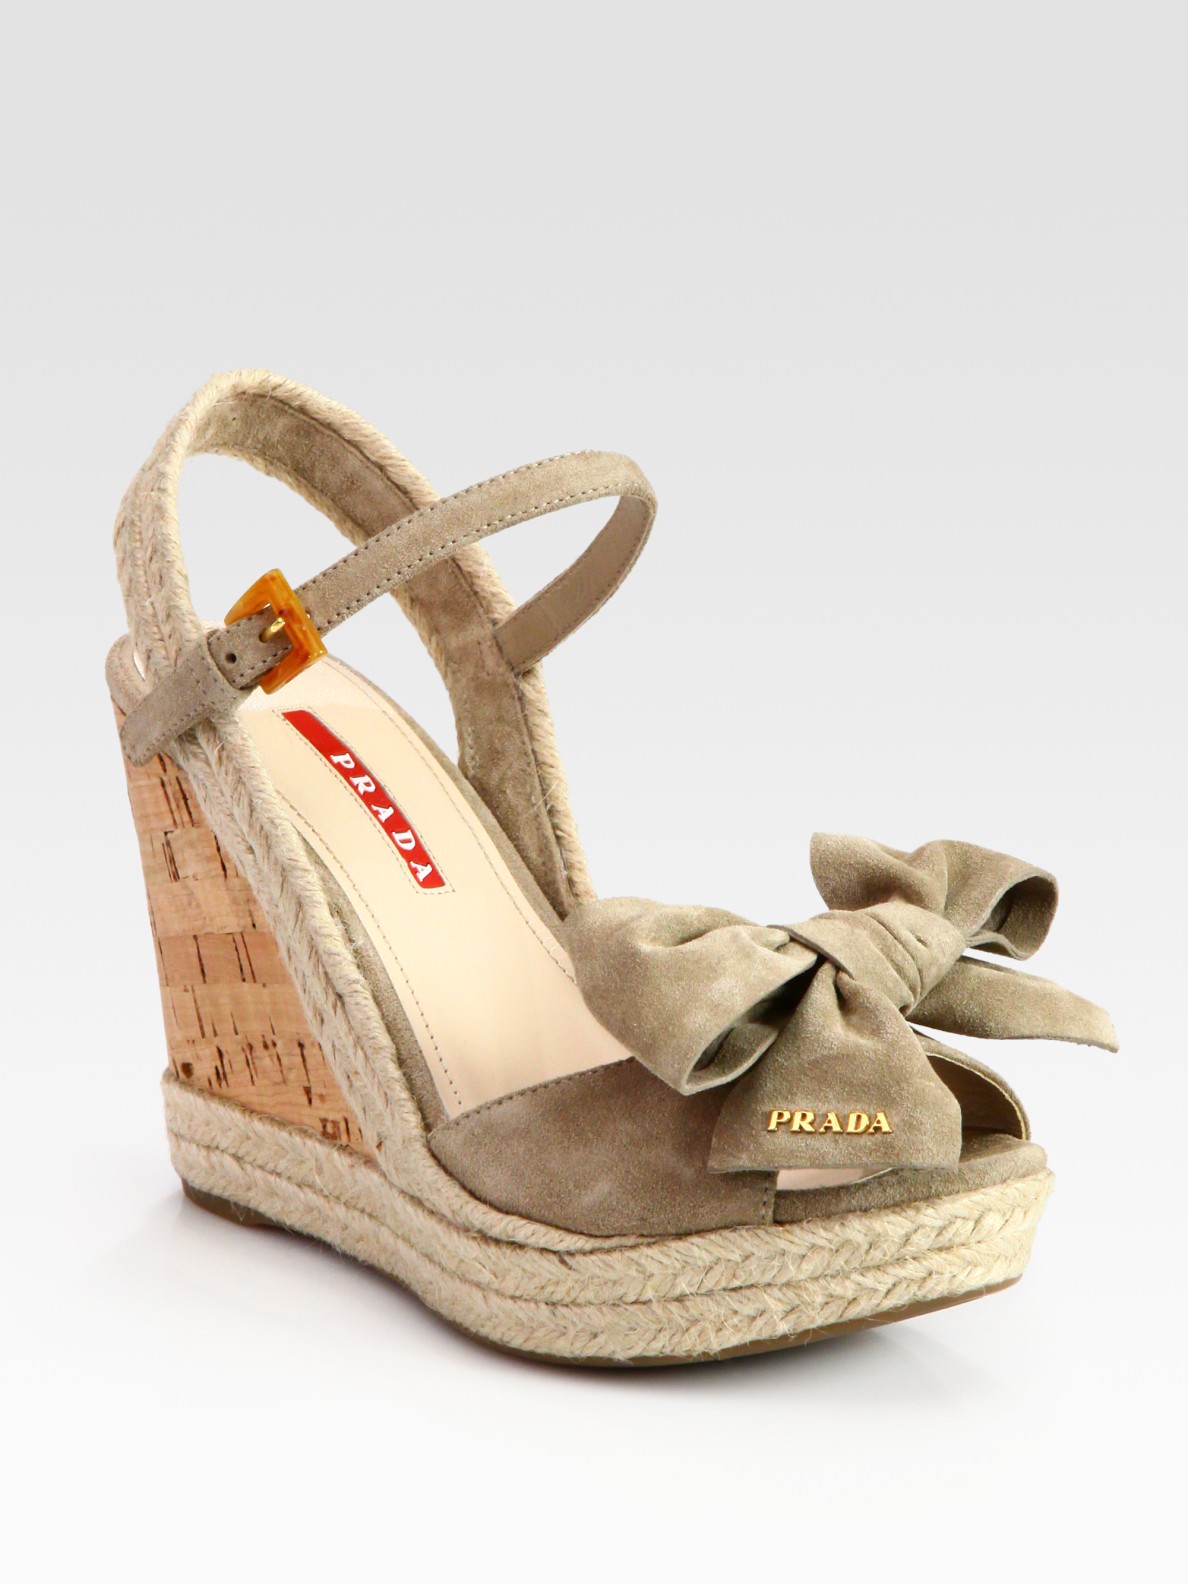 Lyst - Prada Suede Espadrille Slingback Wedge Sandals with Bow in Natural